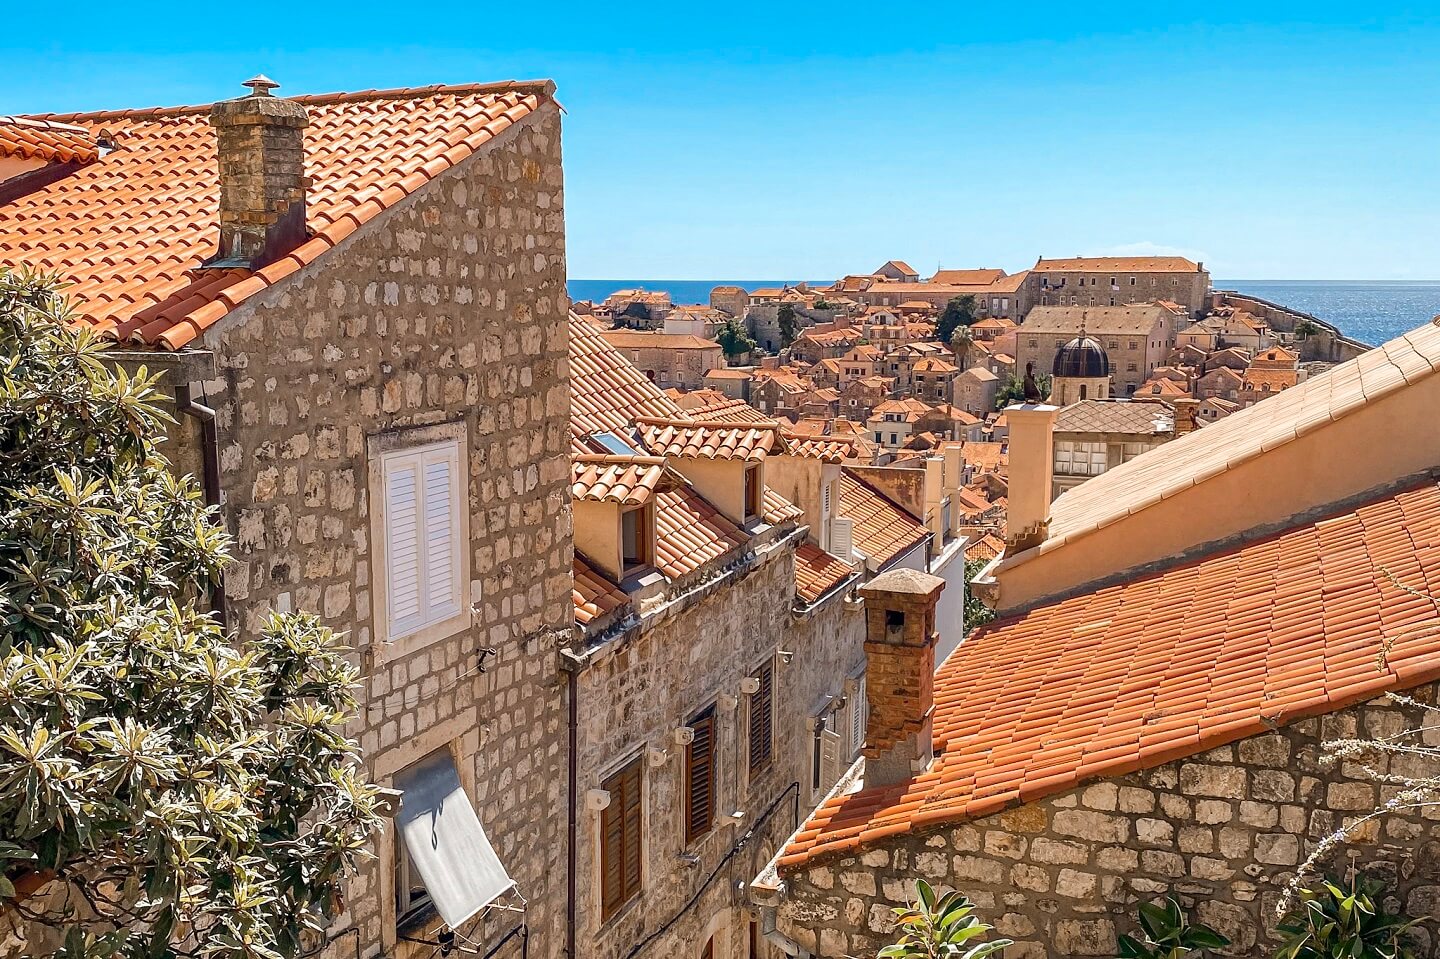 Red roofs of the houses in Dubrovnik Old Town